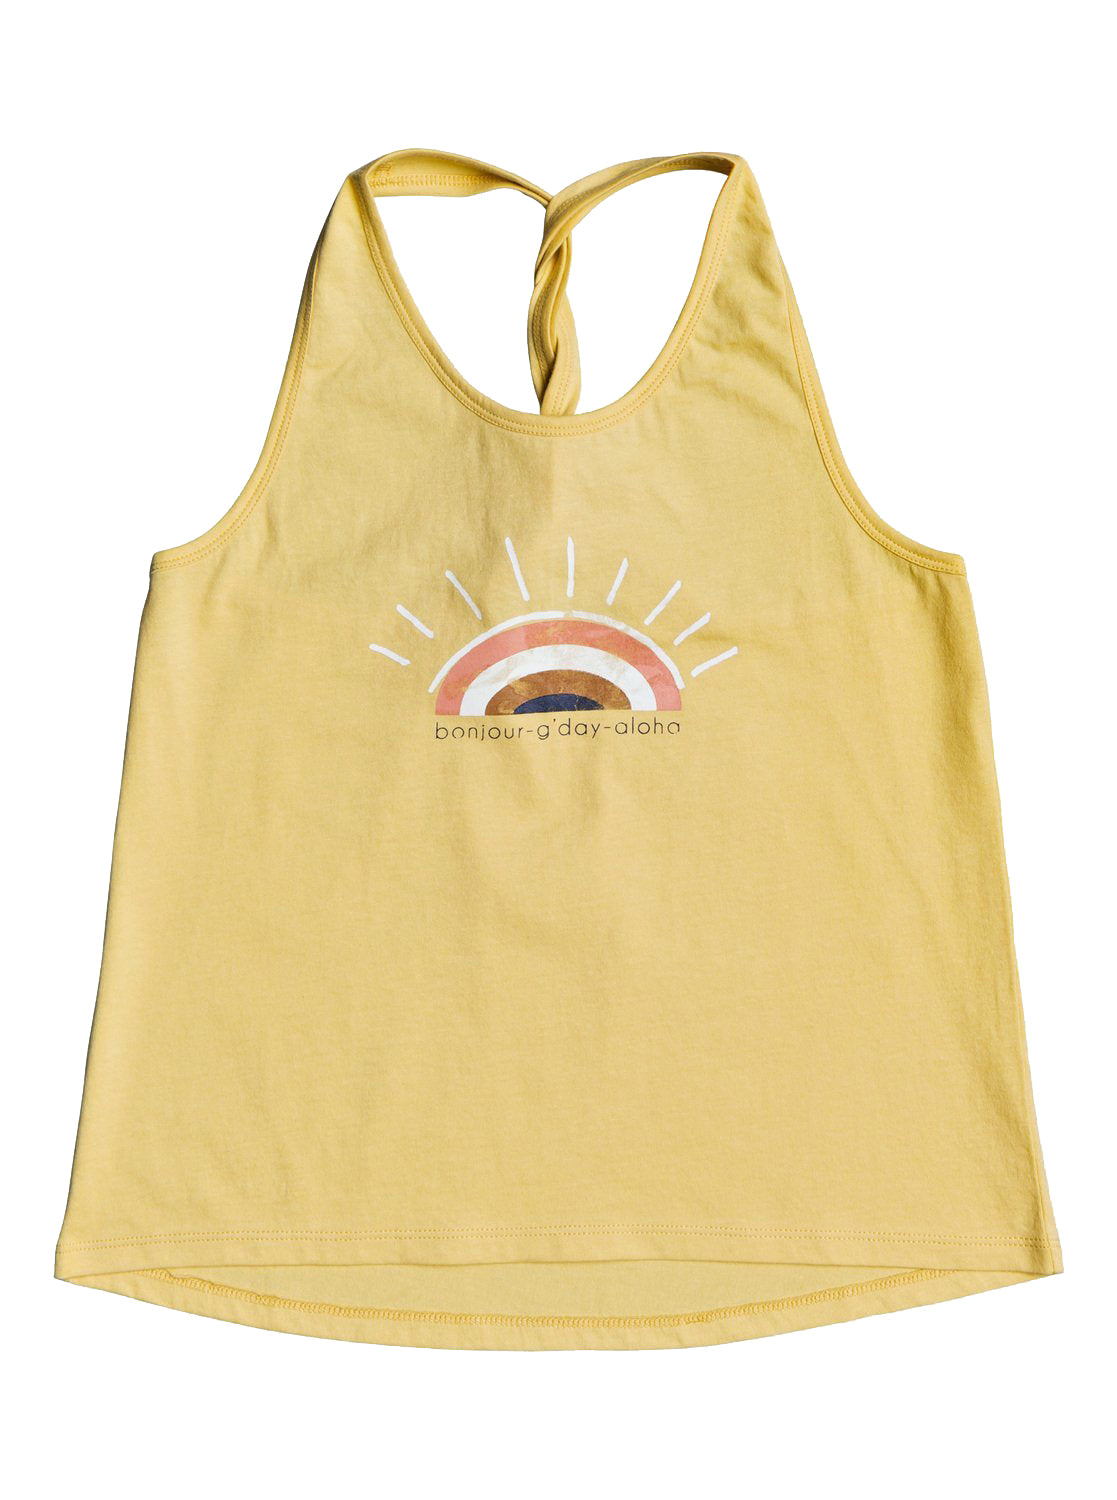 Roxy Wish You The Best Girls Tank Top YGD0 14/XL